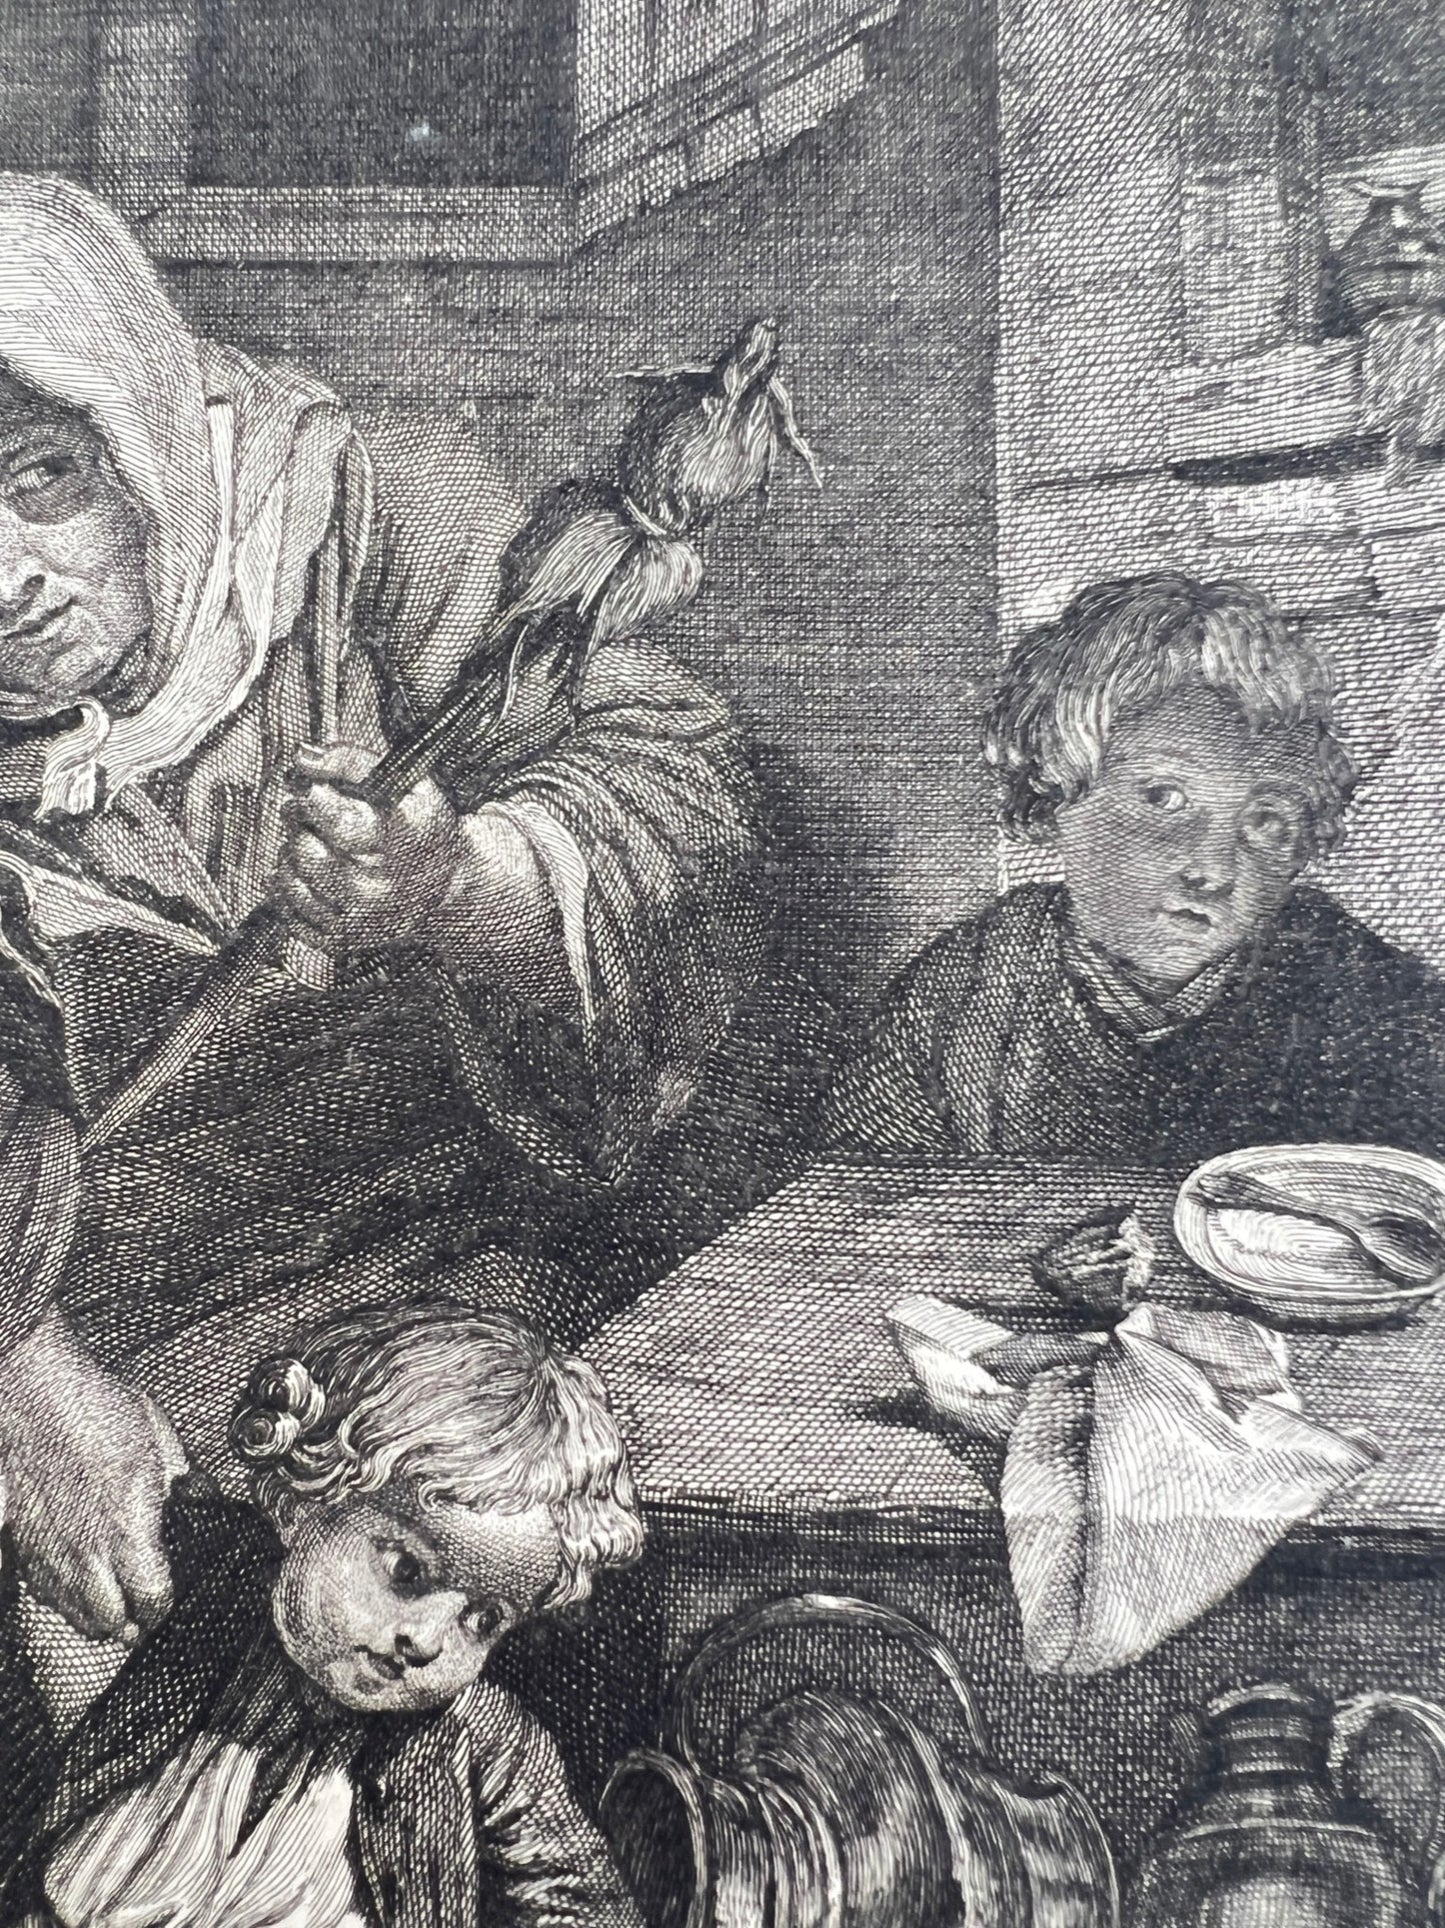 Antique Print - Old Woman with Two Boys - Zambelli - 18th Century United Kingdom